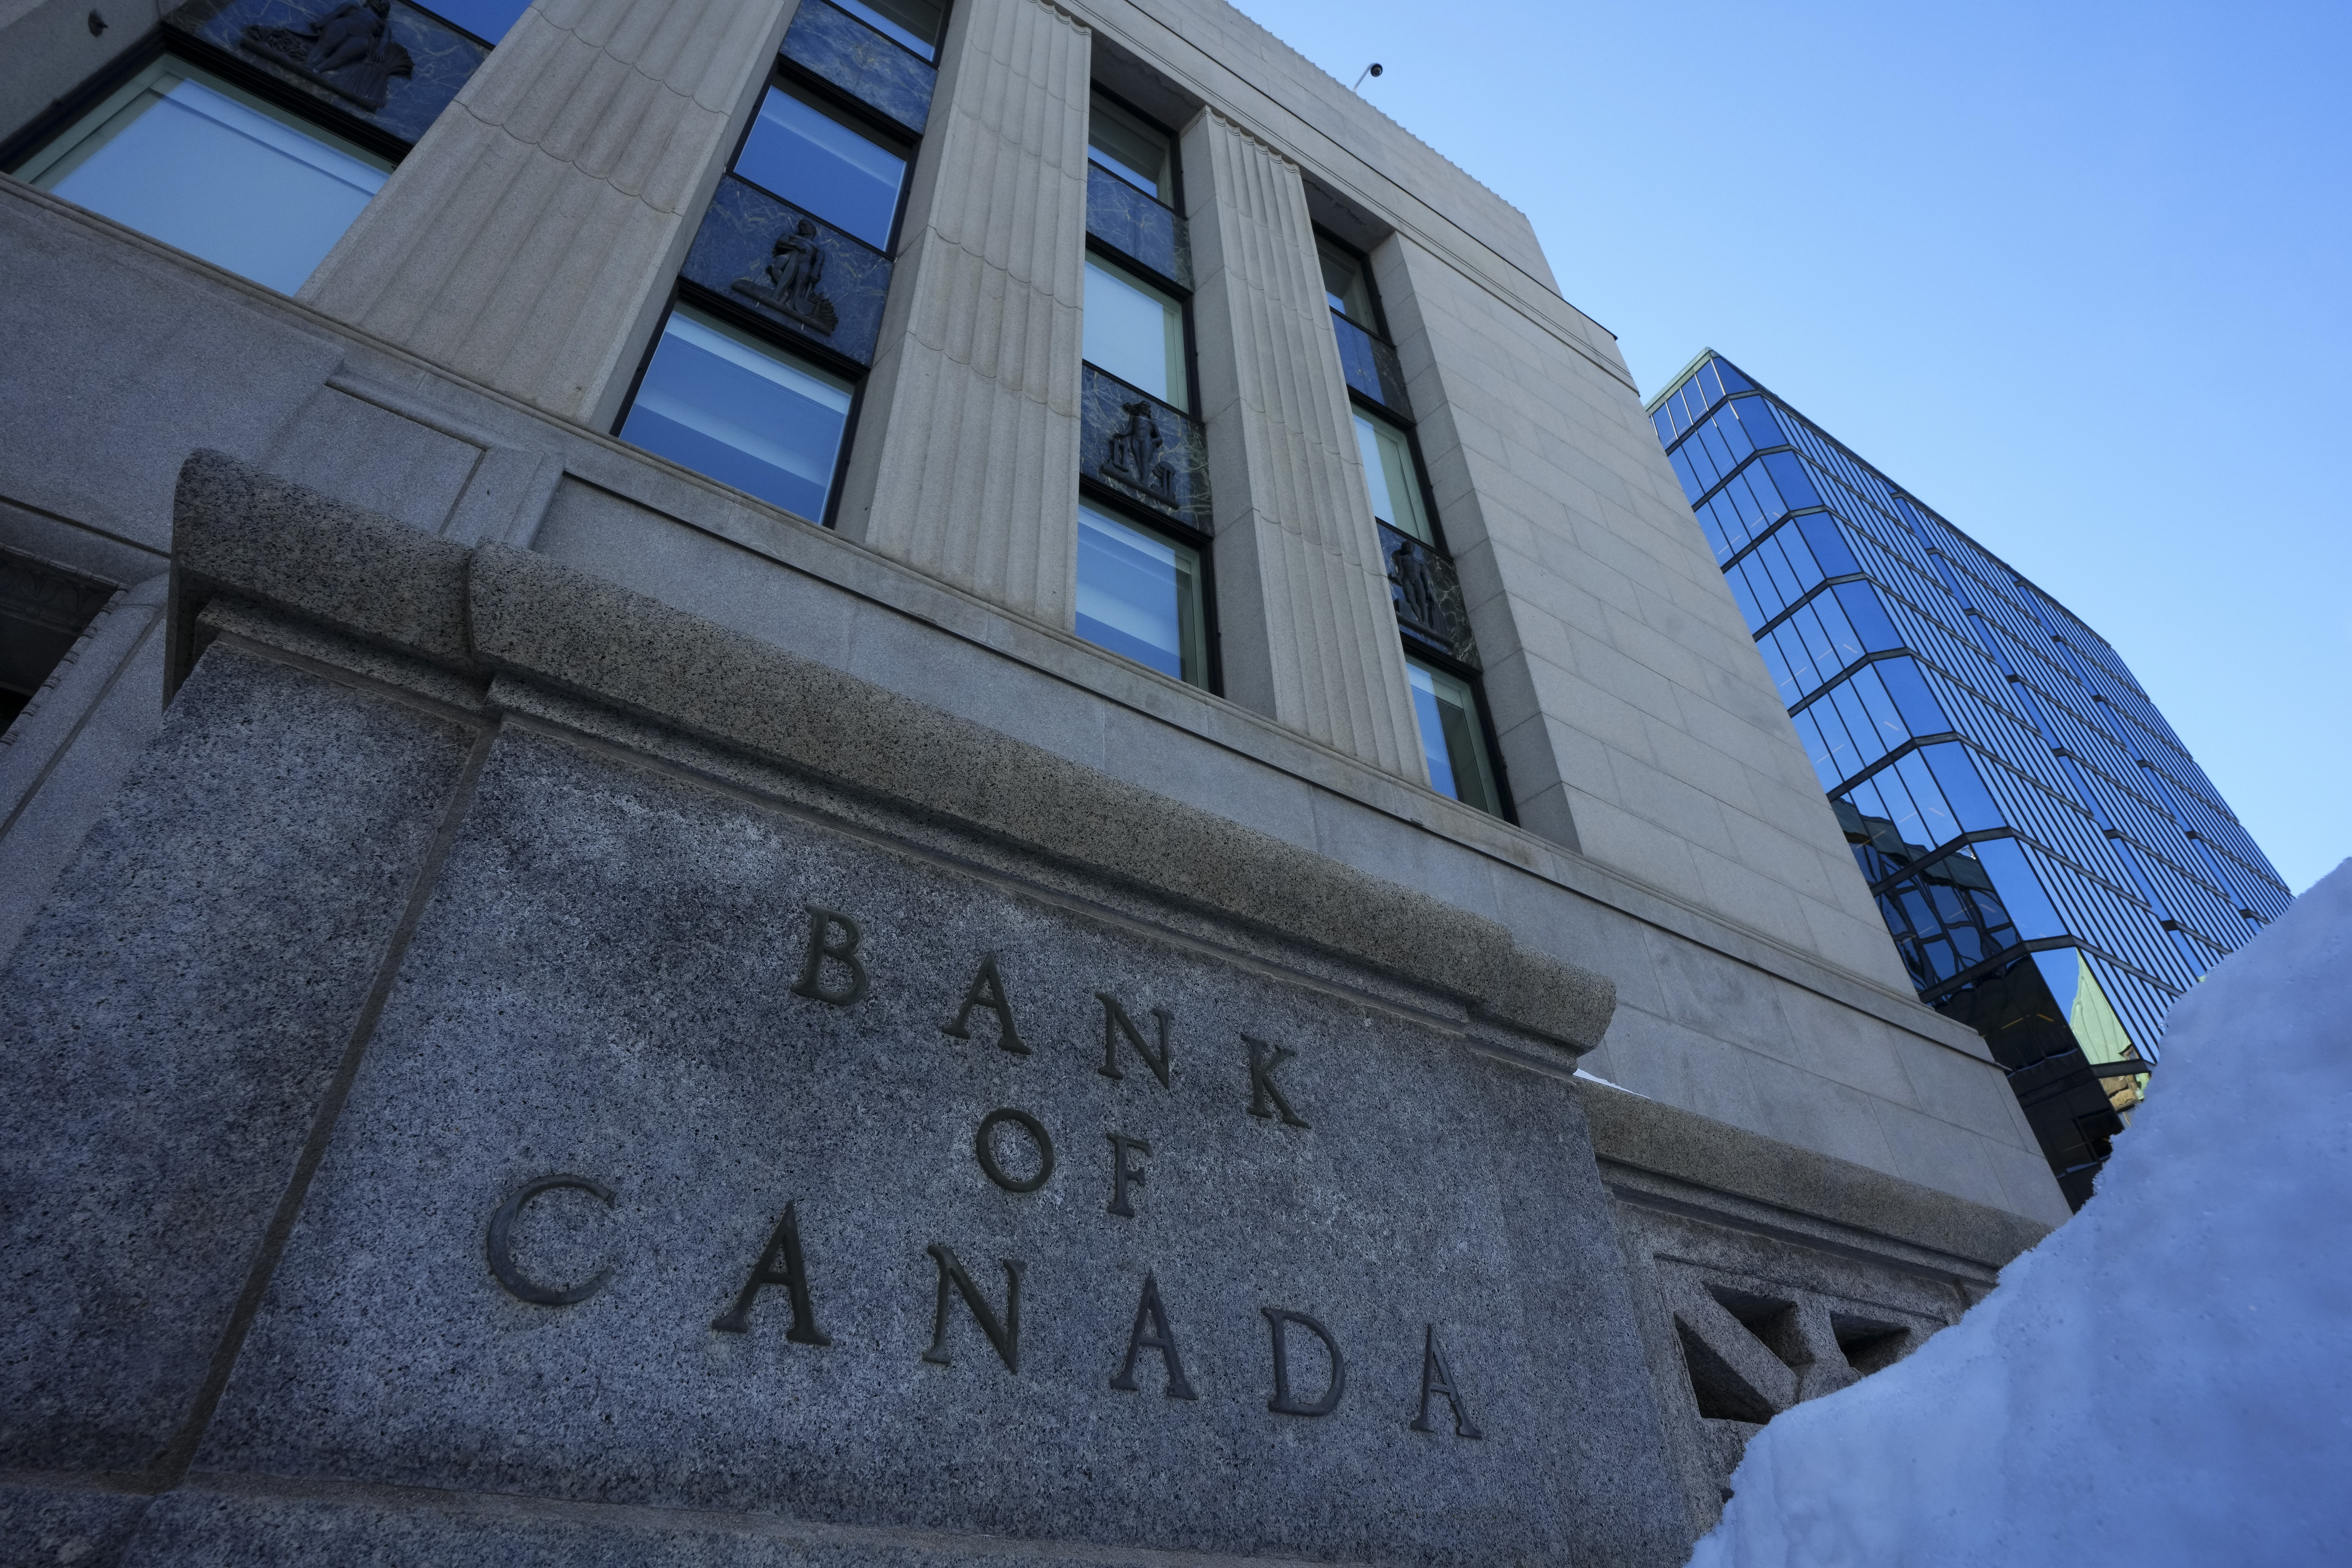 Bank of Canada security staff prep for strike vote amid ‘stagnant’ wages